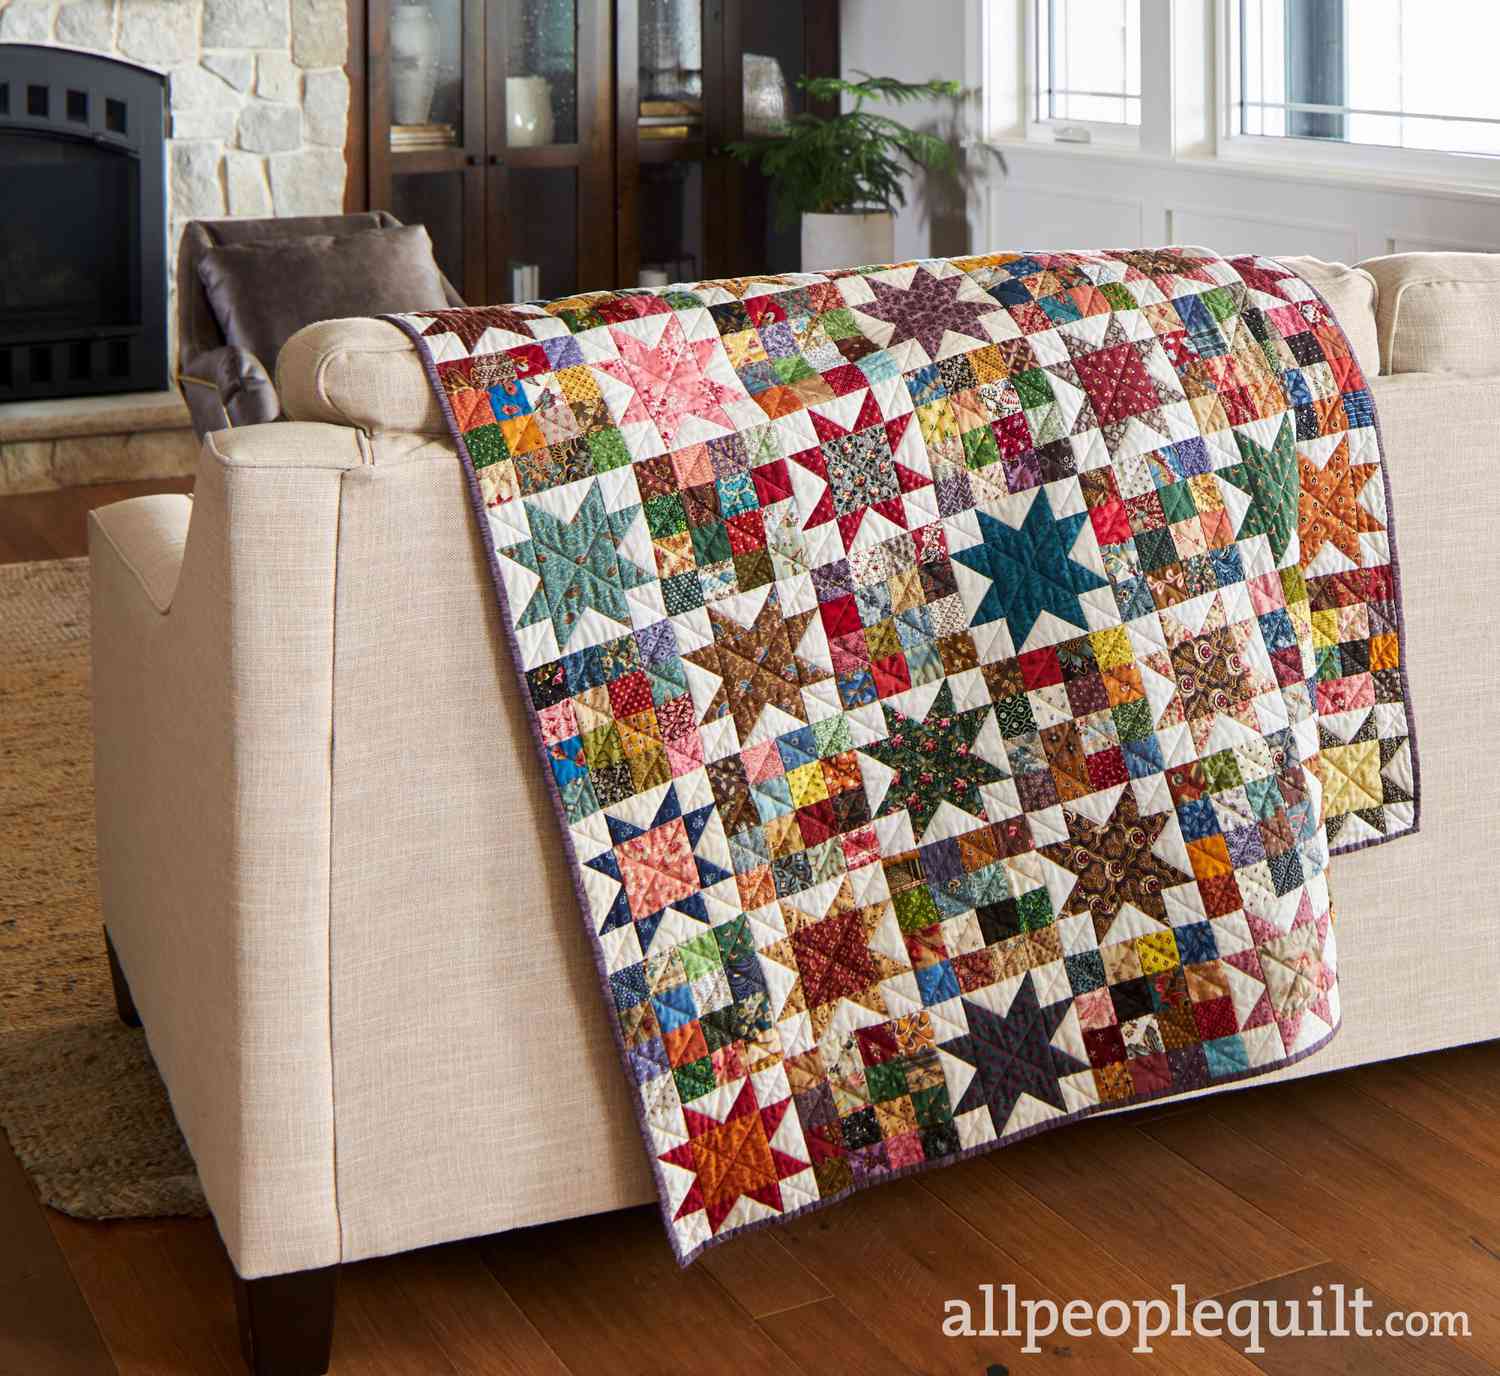 How to Style Quilts on a Couch